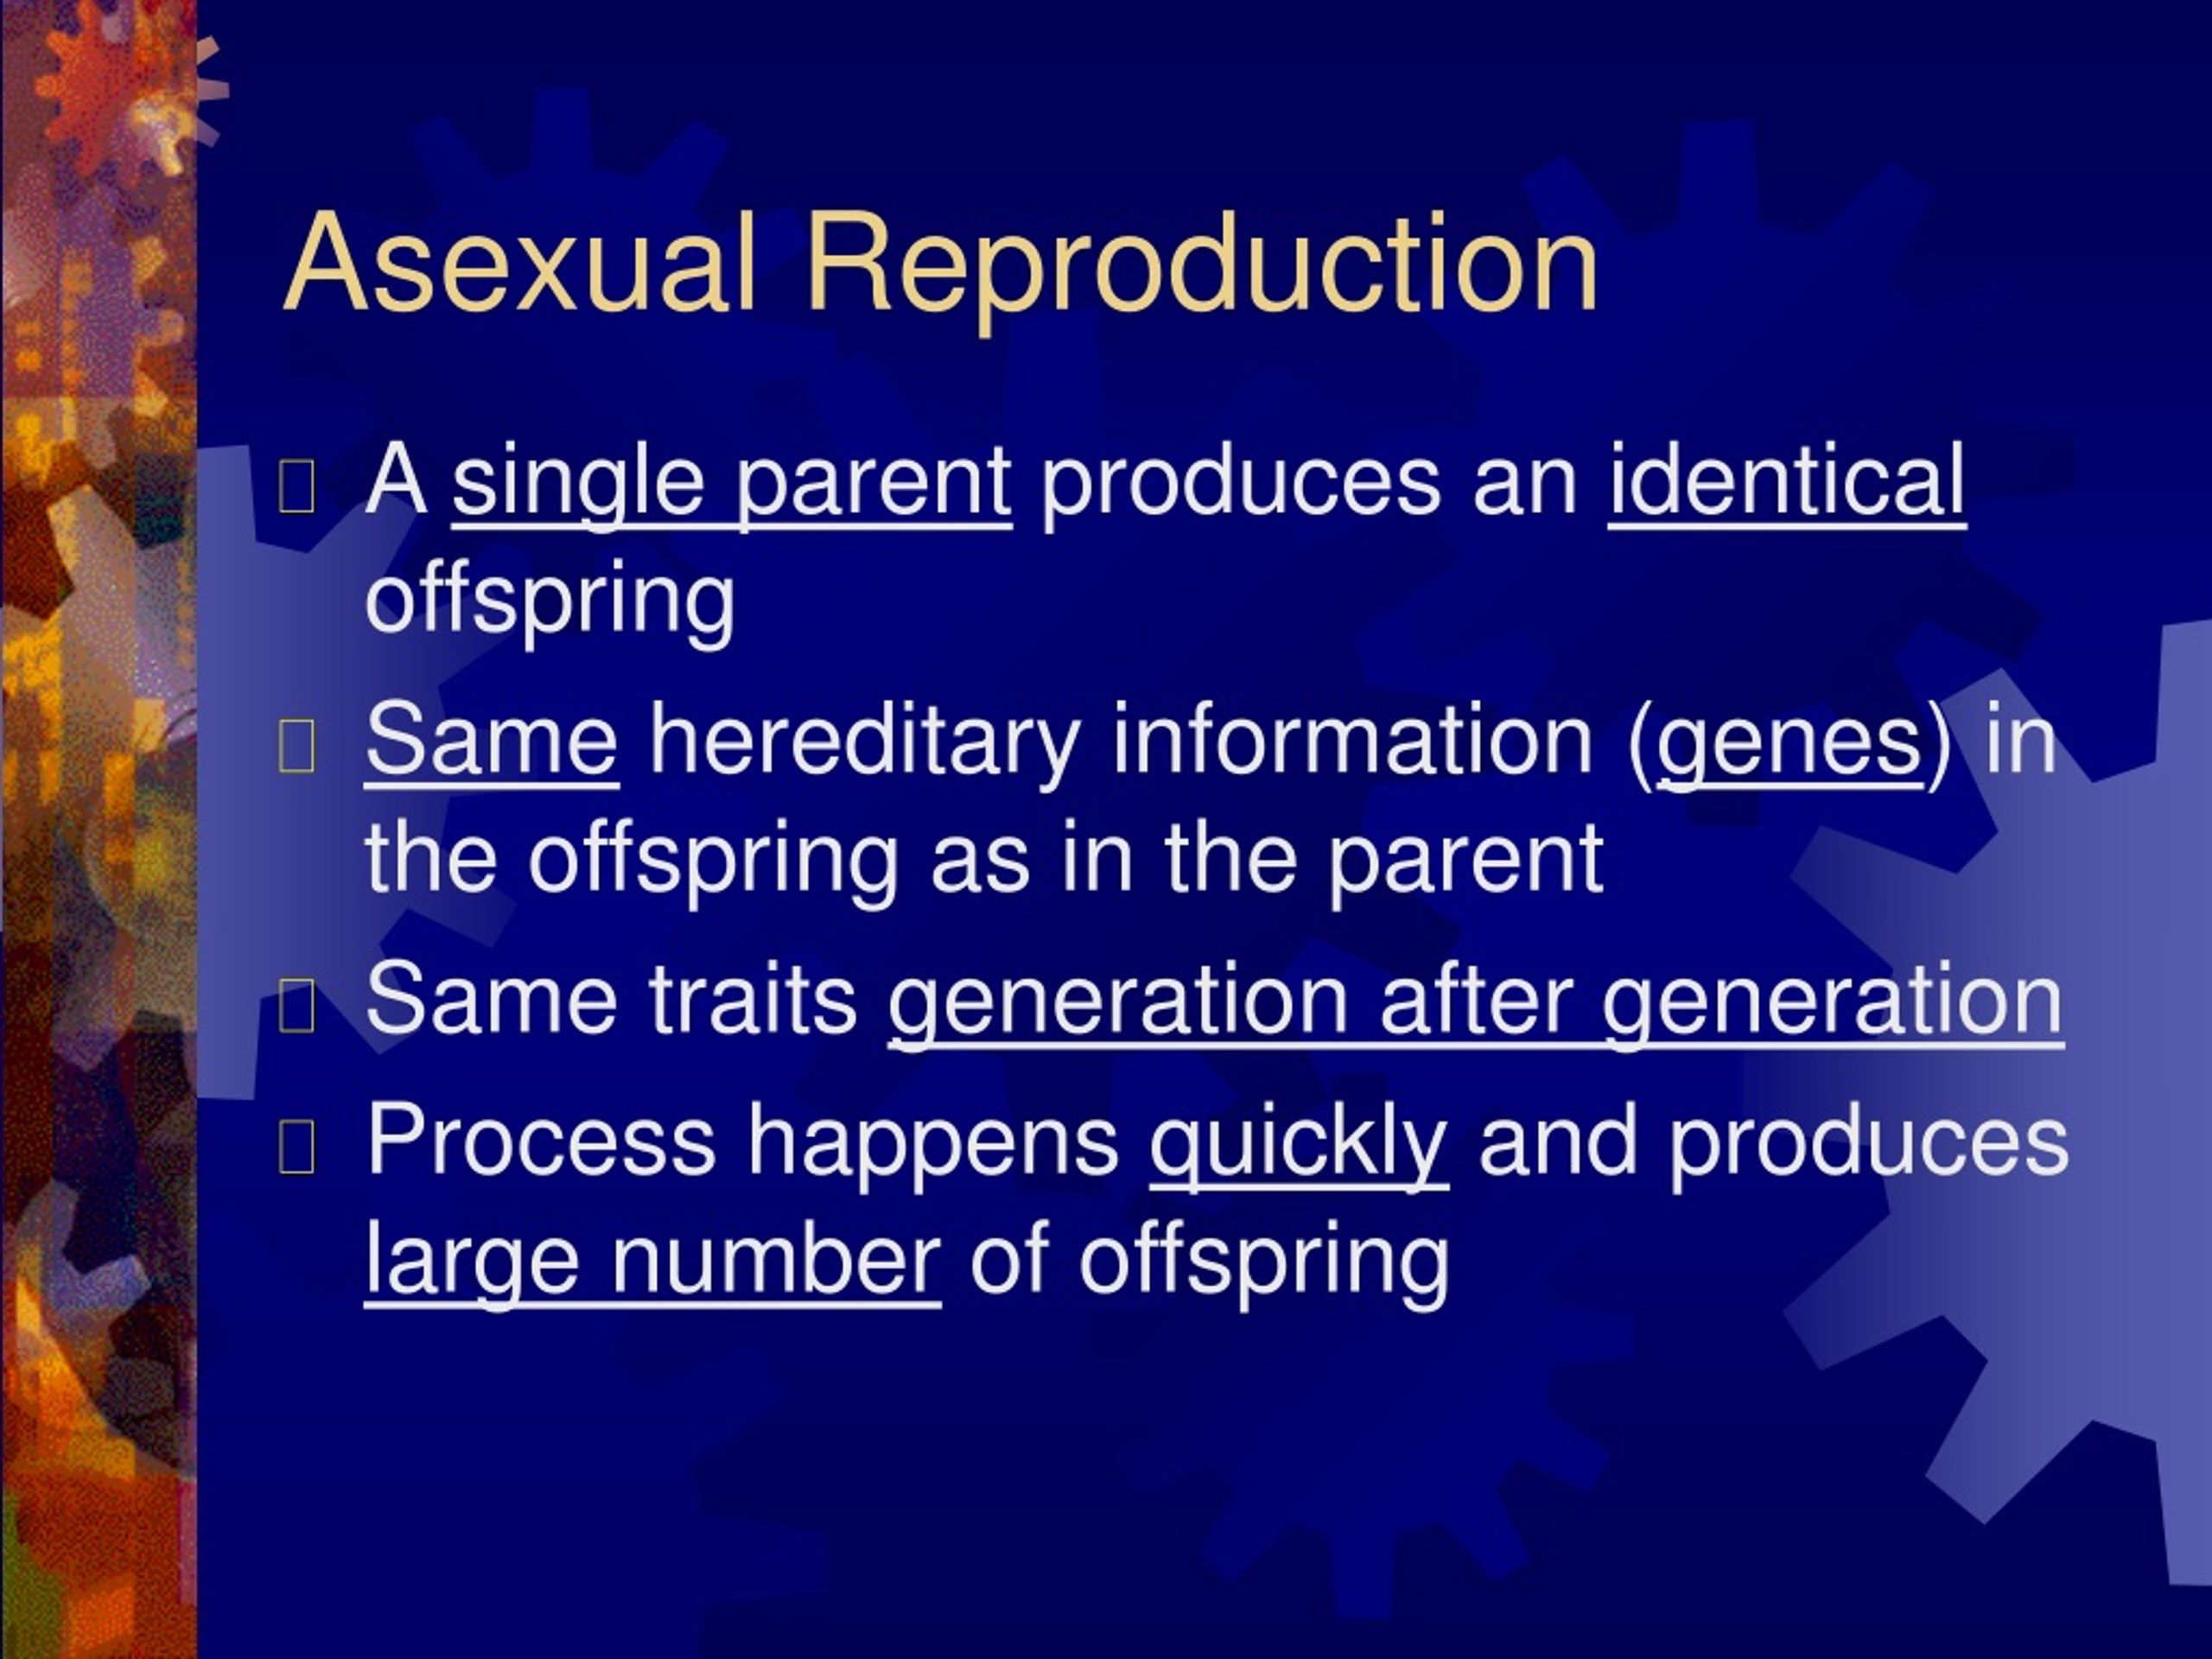 Ppt Asexual Reproduction Powerpoint Presentation Free Download Id9071843 2740